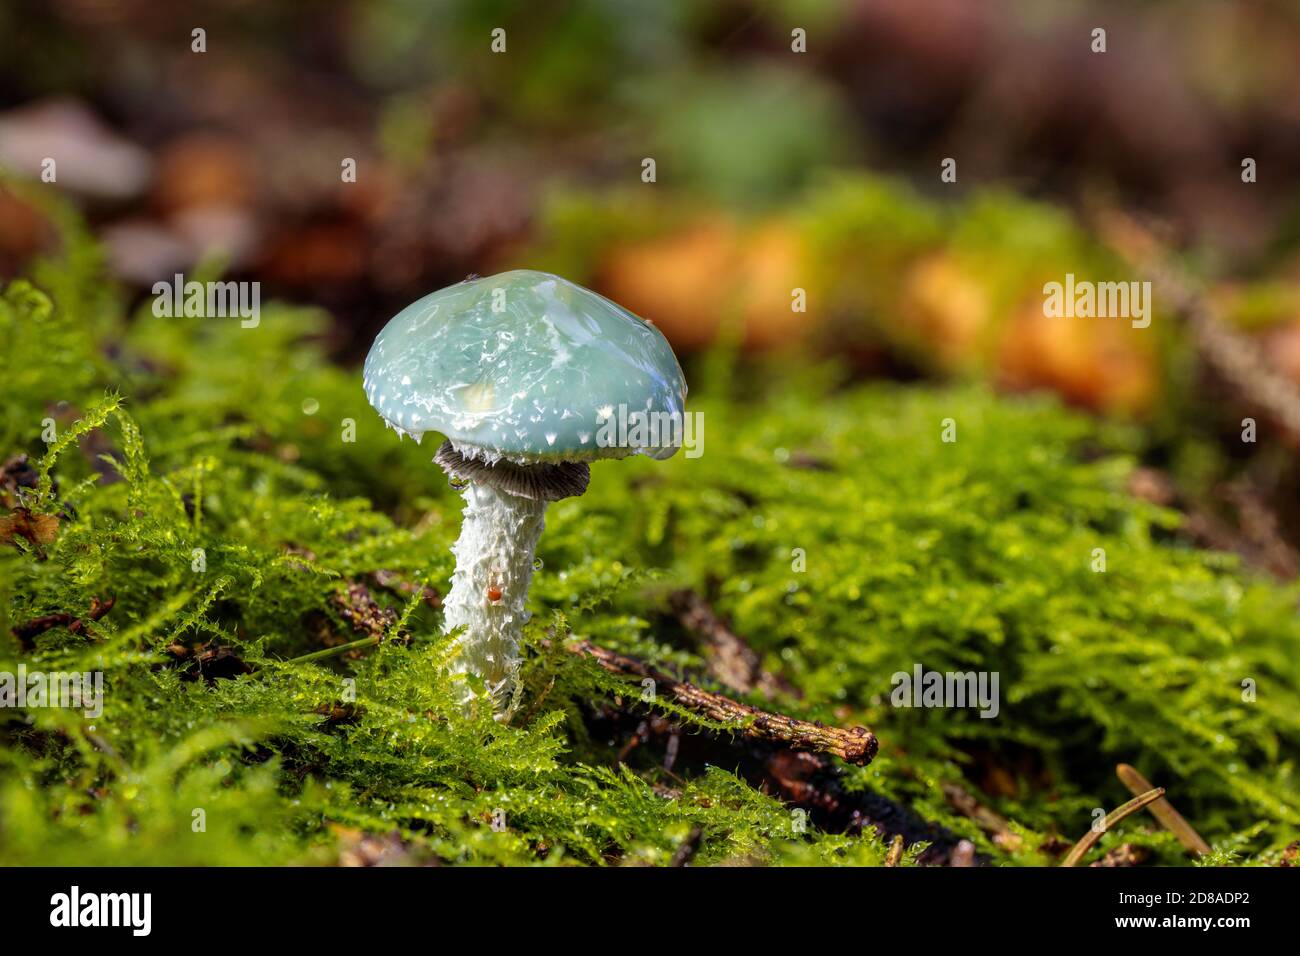 Stropharia aeruginosa, commonly known as the verdigris agaric, is a medium-sized green, slimy woodland mushroom, found on lawns, mulch and woodland fr Stock Photo